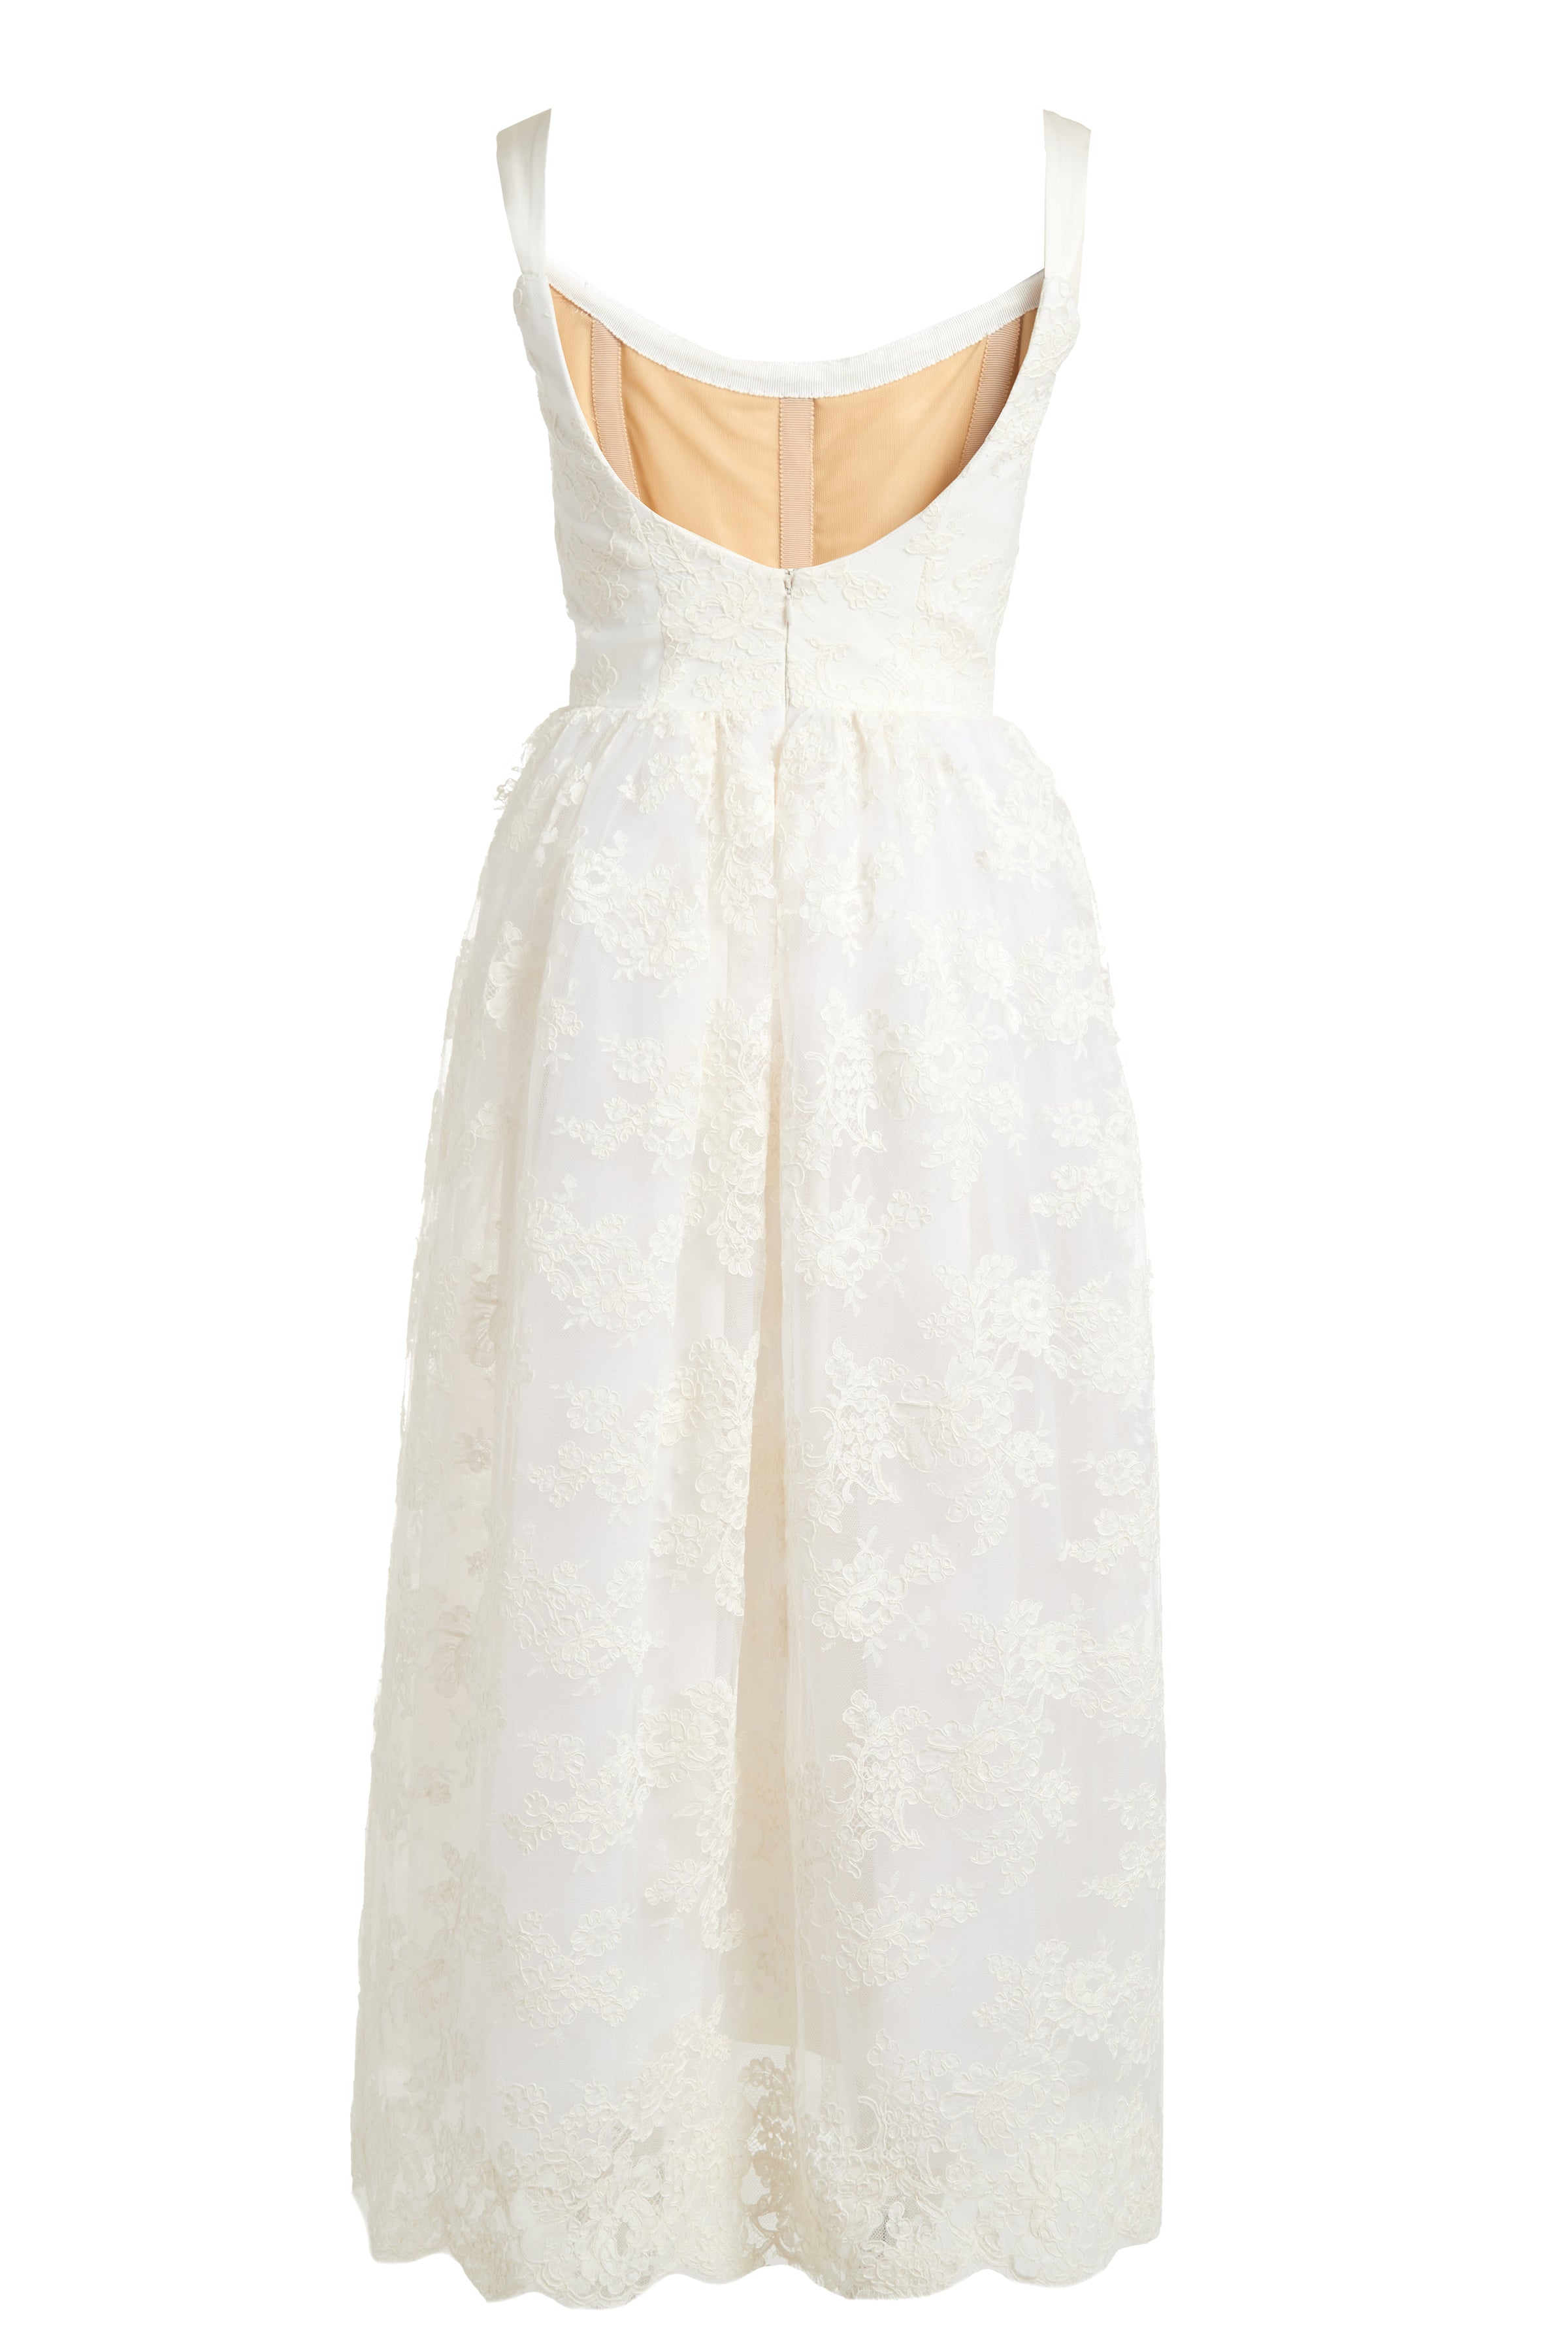 Apple White Lace Dress with Bow